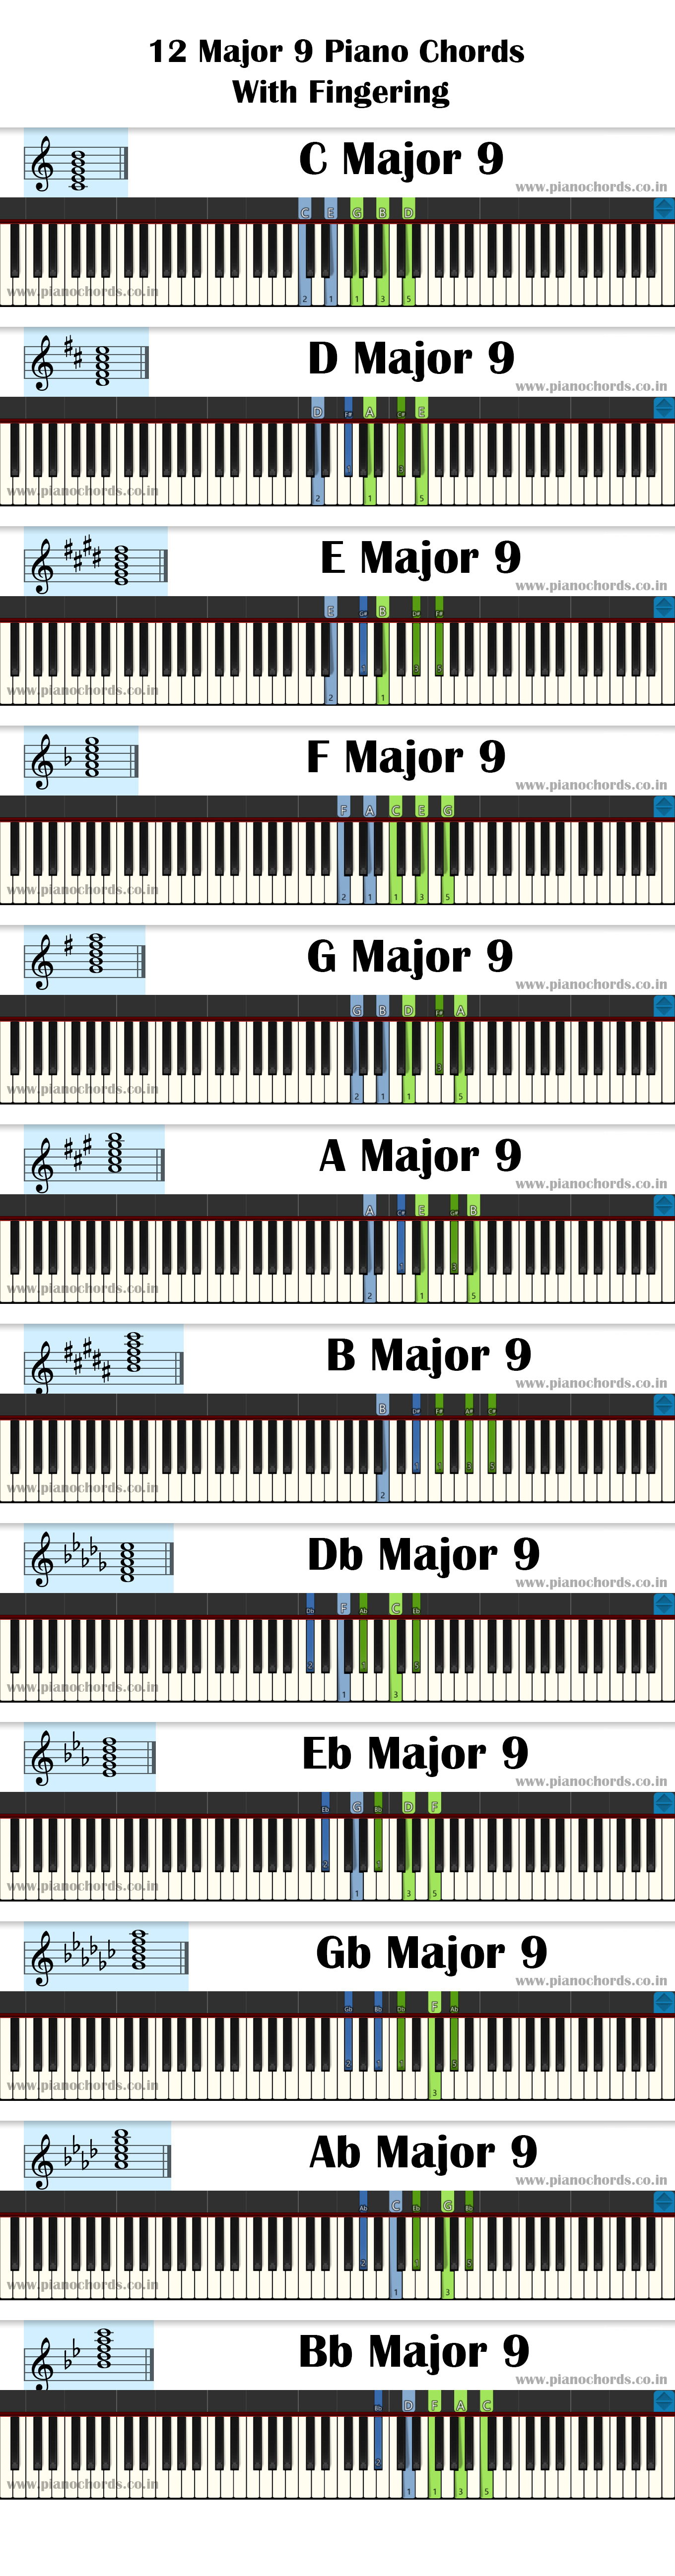 all-piano-chords-pdf-with-fingering-diagram-staff-notation